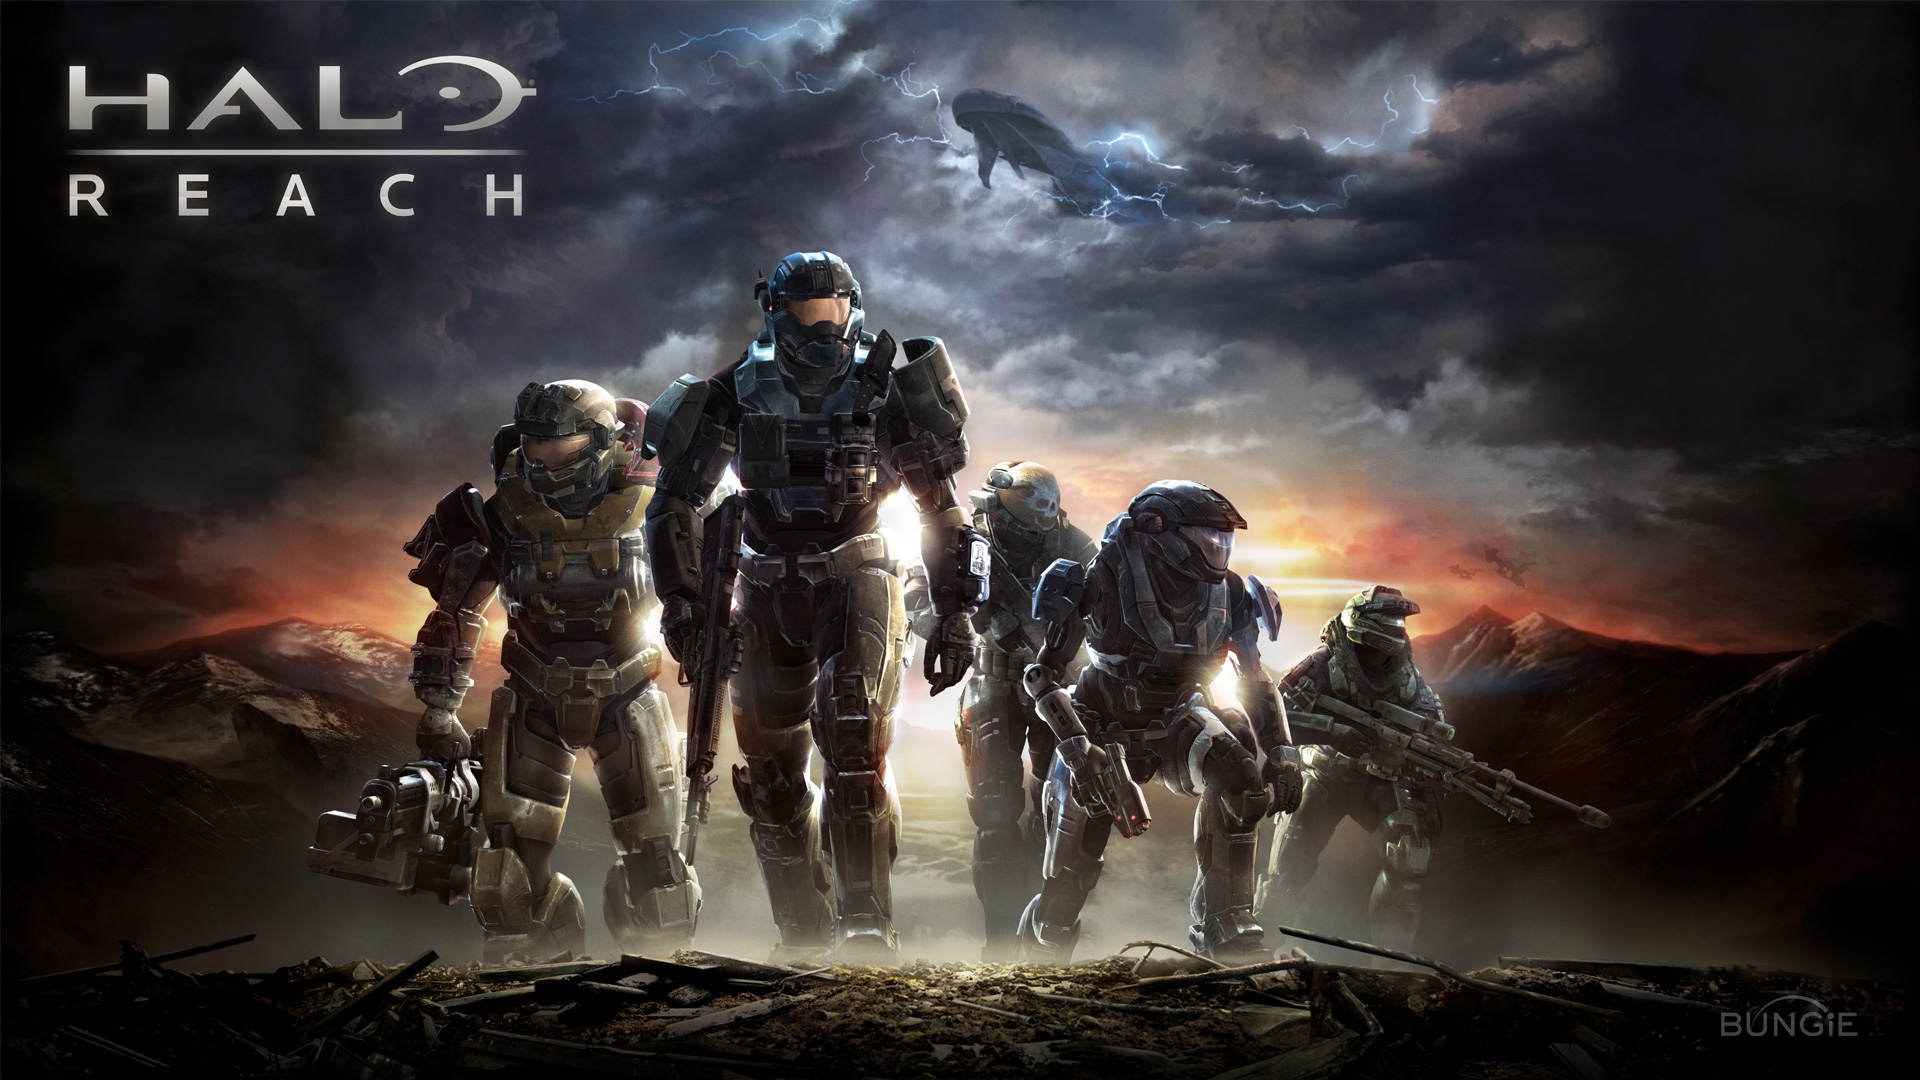 HALO HD Wallpapers and Backgrounds